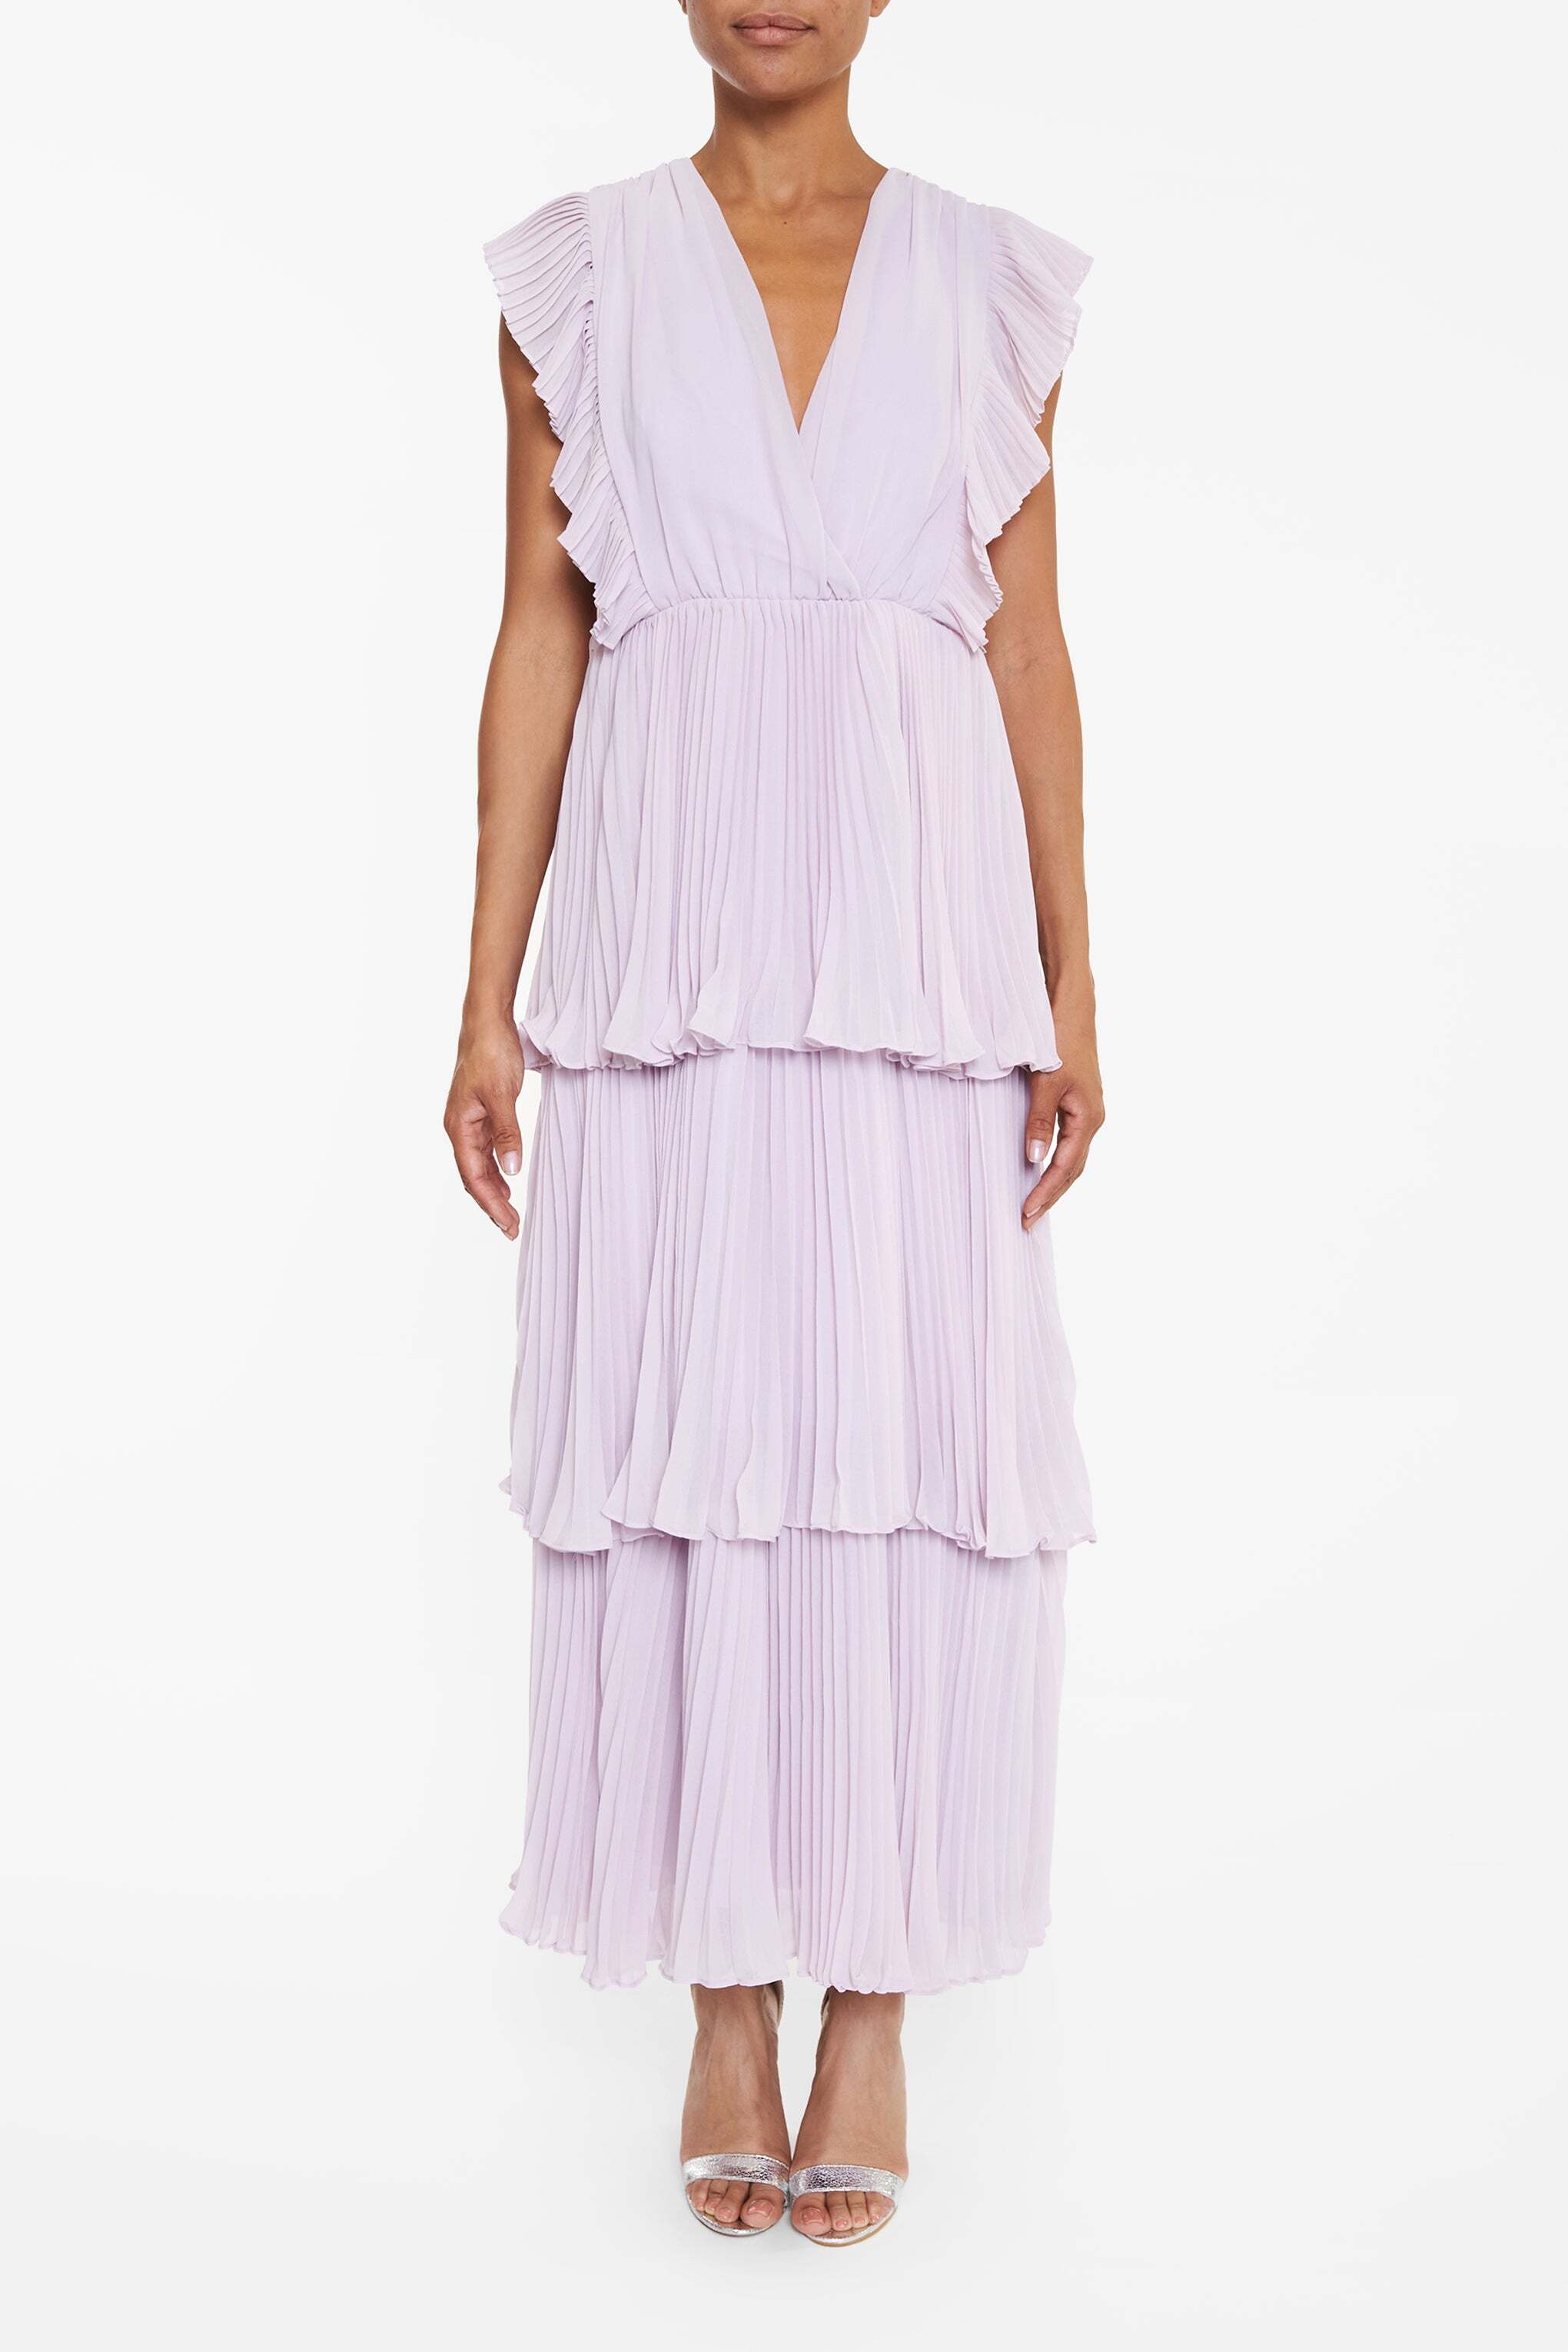 True Decadence Lilac pleated tiered ...